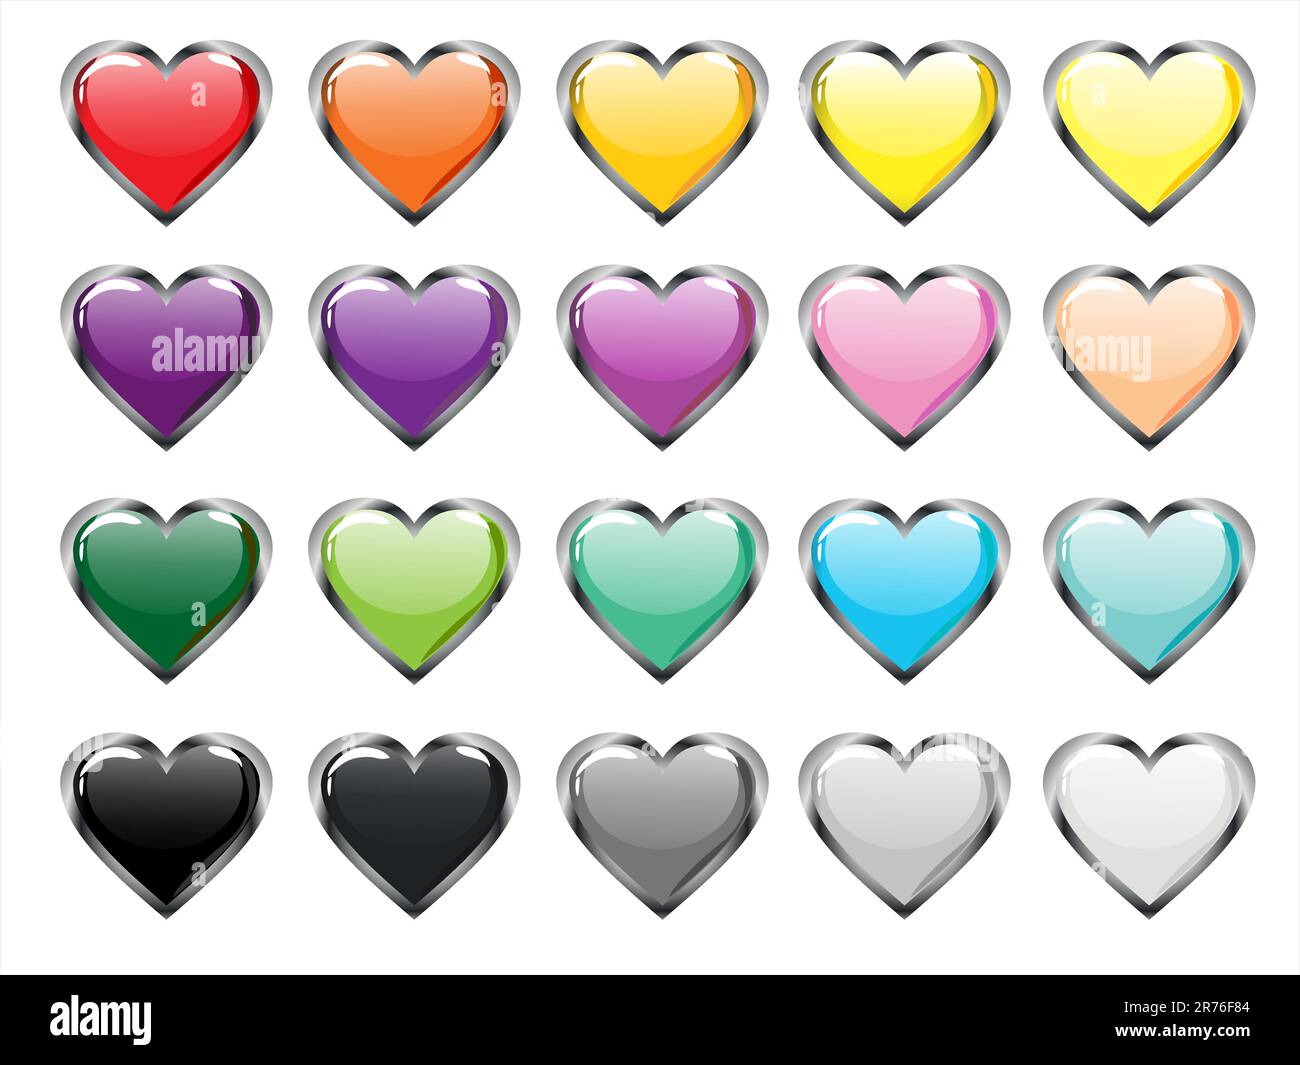 vector eps 10  illustration of colorful glass heart button Stock Vector